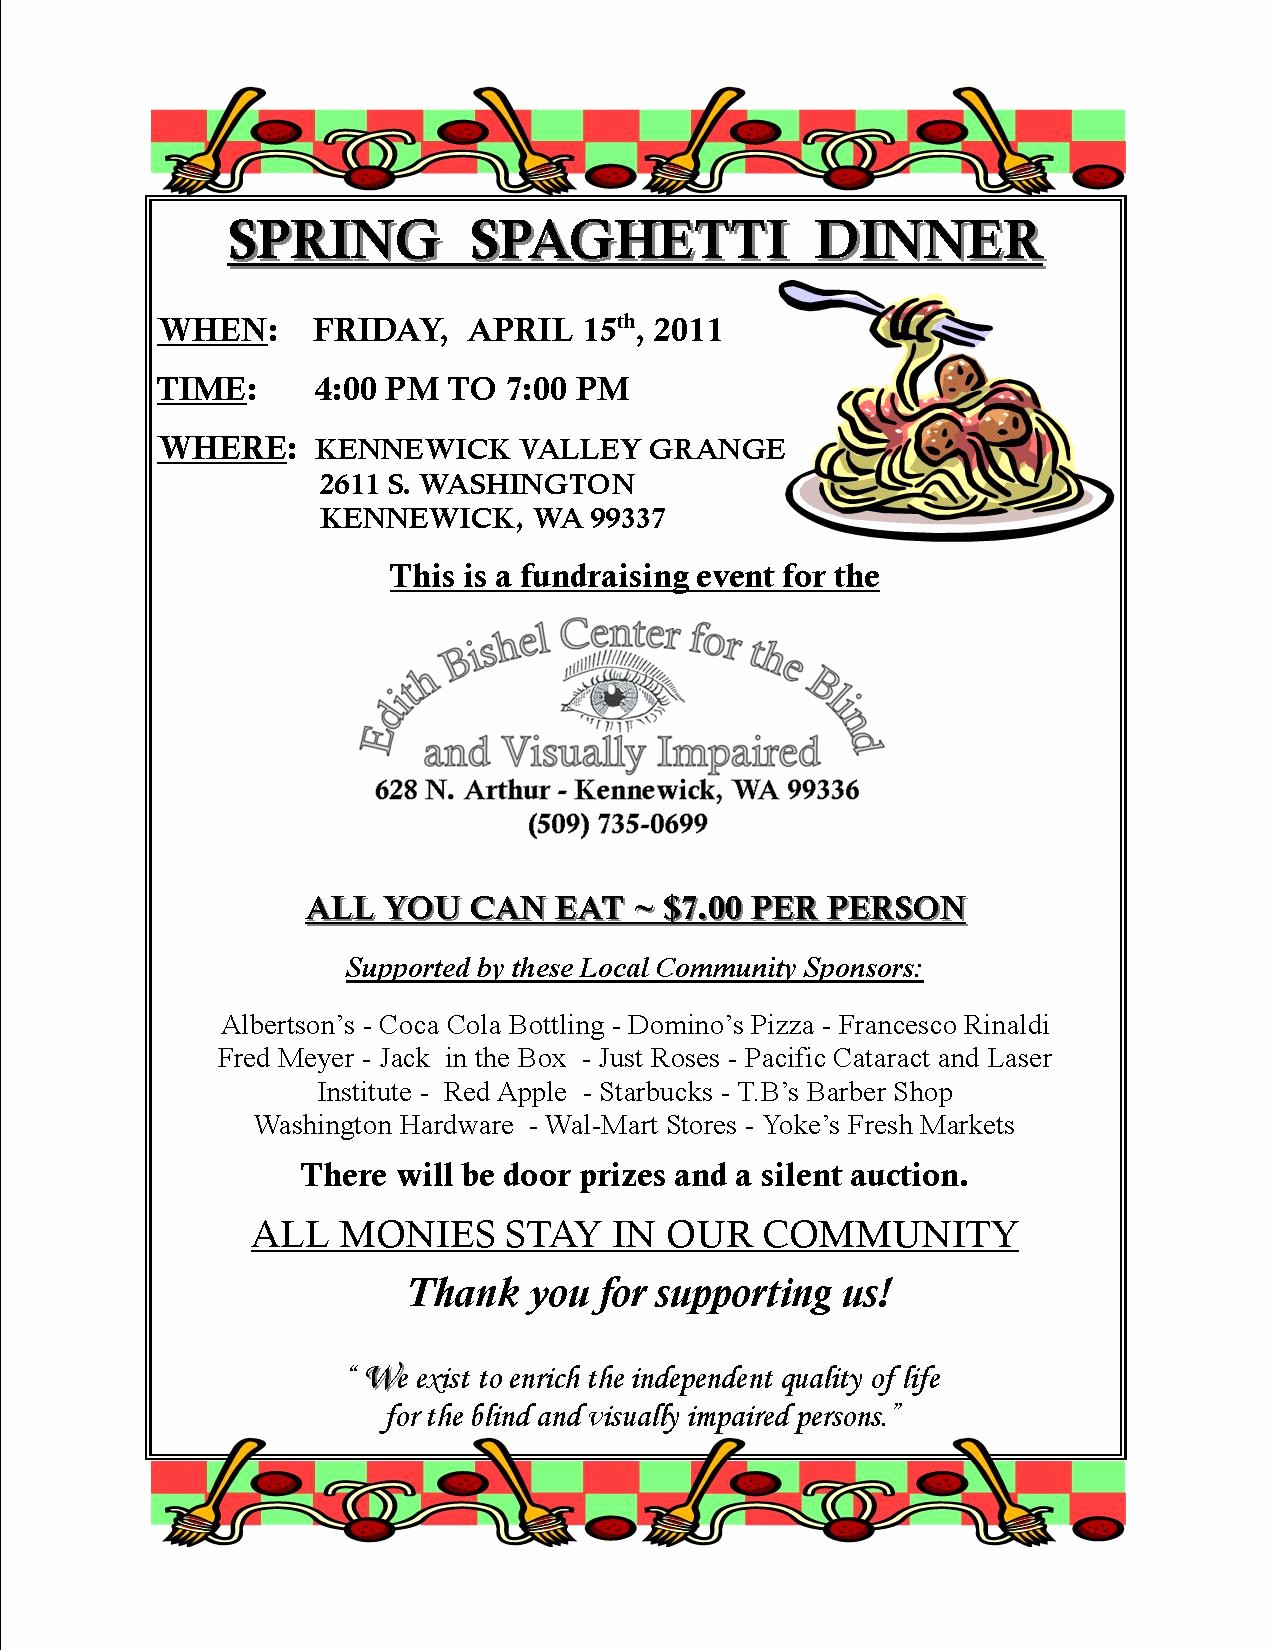 Flyers for Fundraisers Template Free Inspirational Spaghetti Dinner Flyer Template Yourweek 198bddeca25e